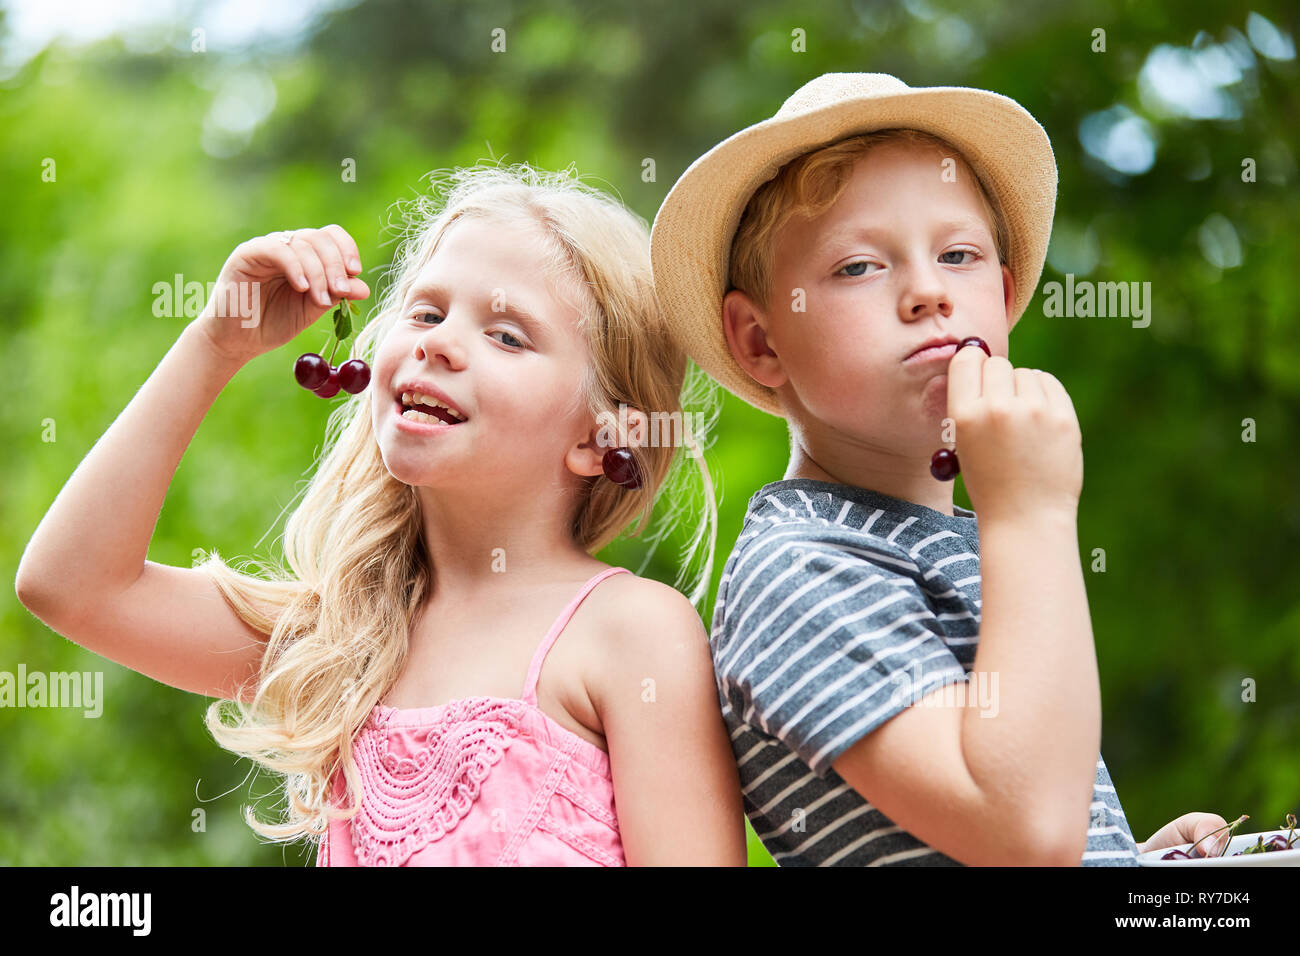 Two children as friends or siblings Couple munching cherries together Stock Photo